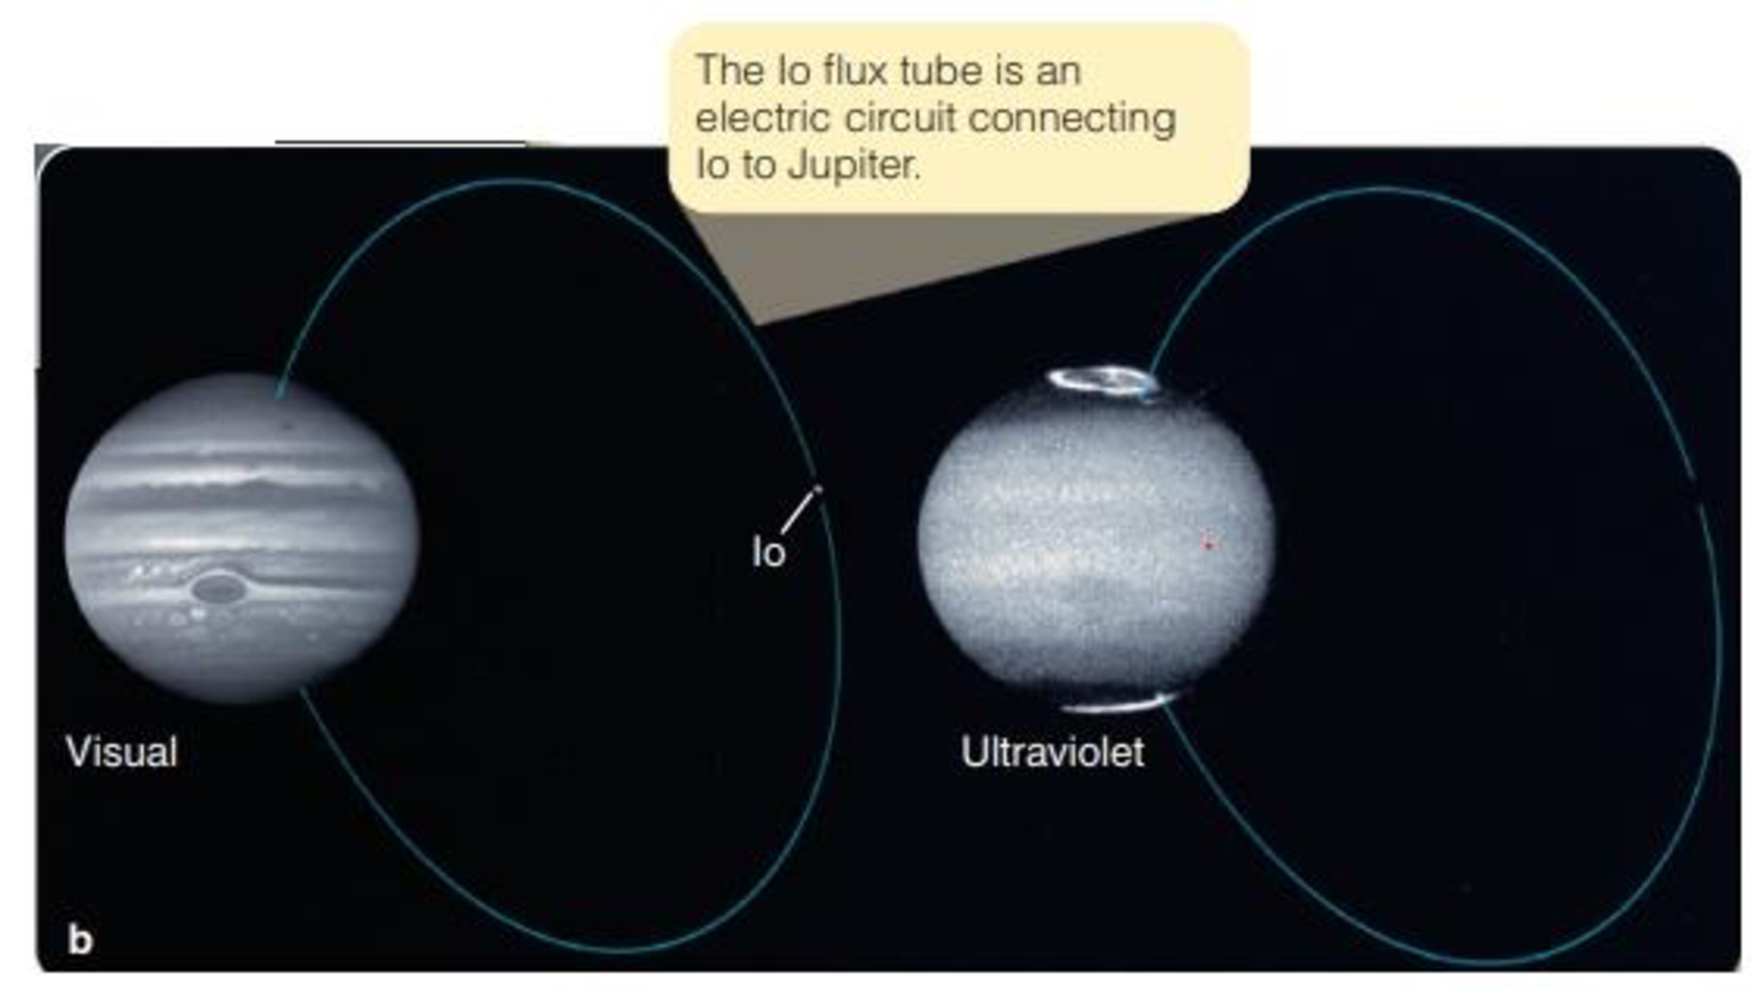 Chapter 23, Problem 1LTL, Look at Figure 22-4b. Compare the visual and UV images of Jupiter. What do you notice? What does it 